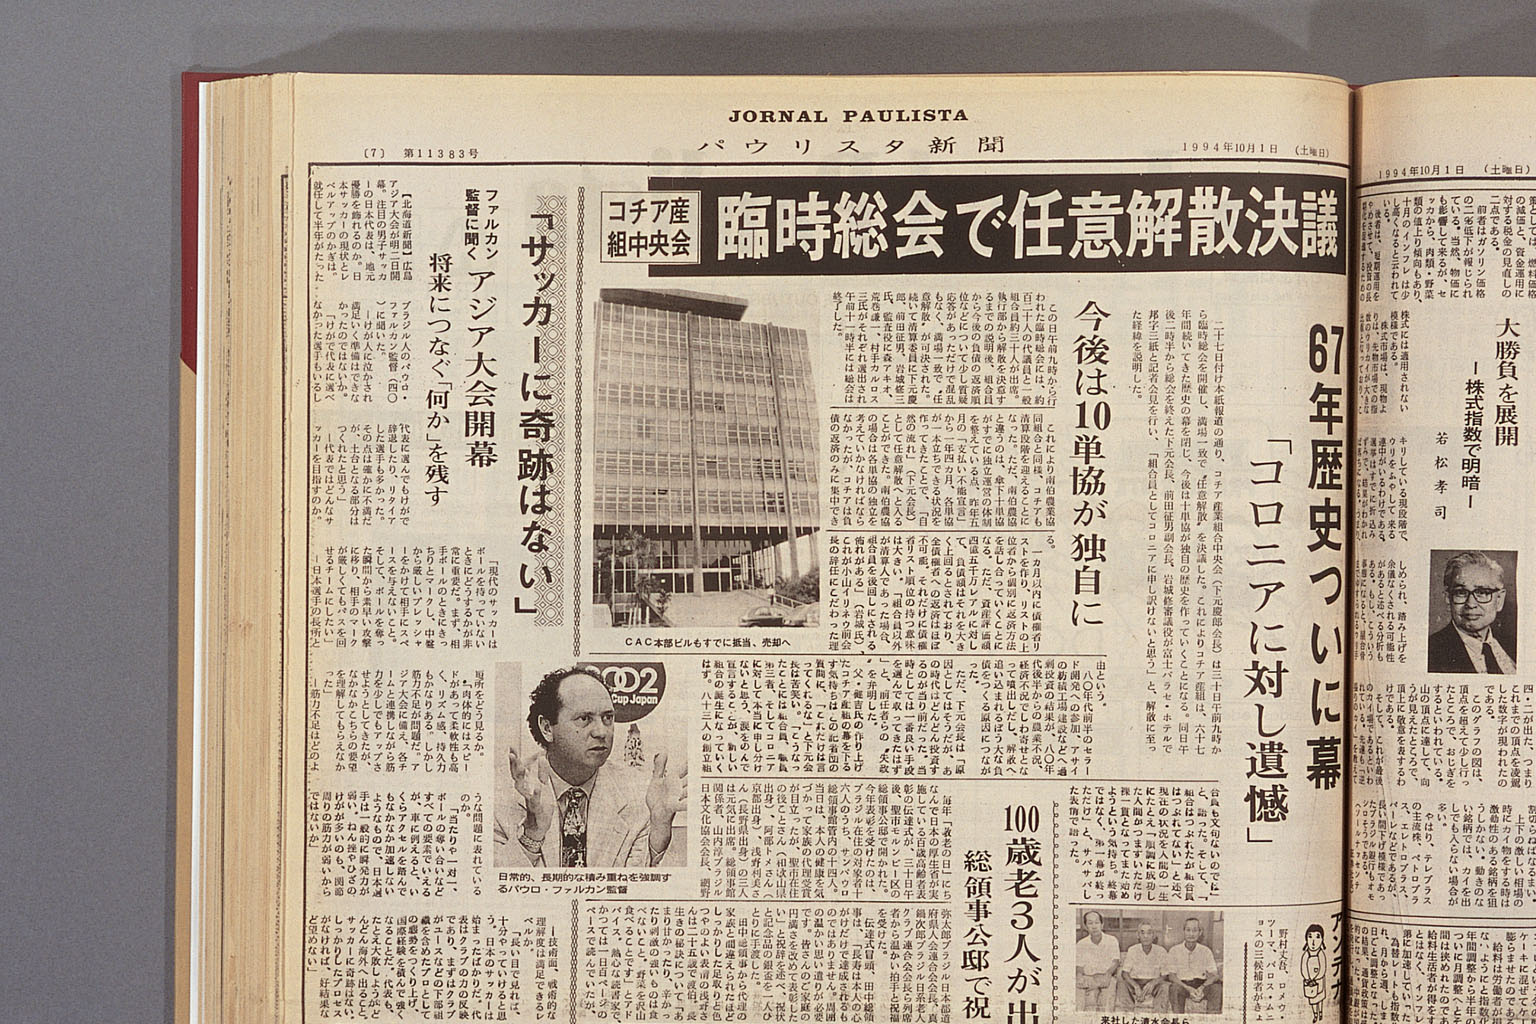 Image “Japanese language newspaper in Brazil reporting on the dissolution of the Cotia Agricultural Cooperative”